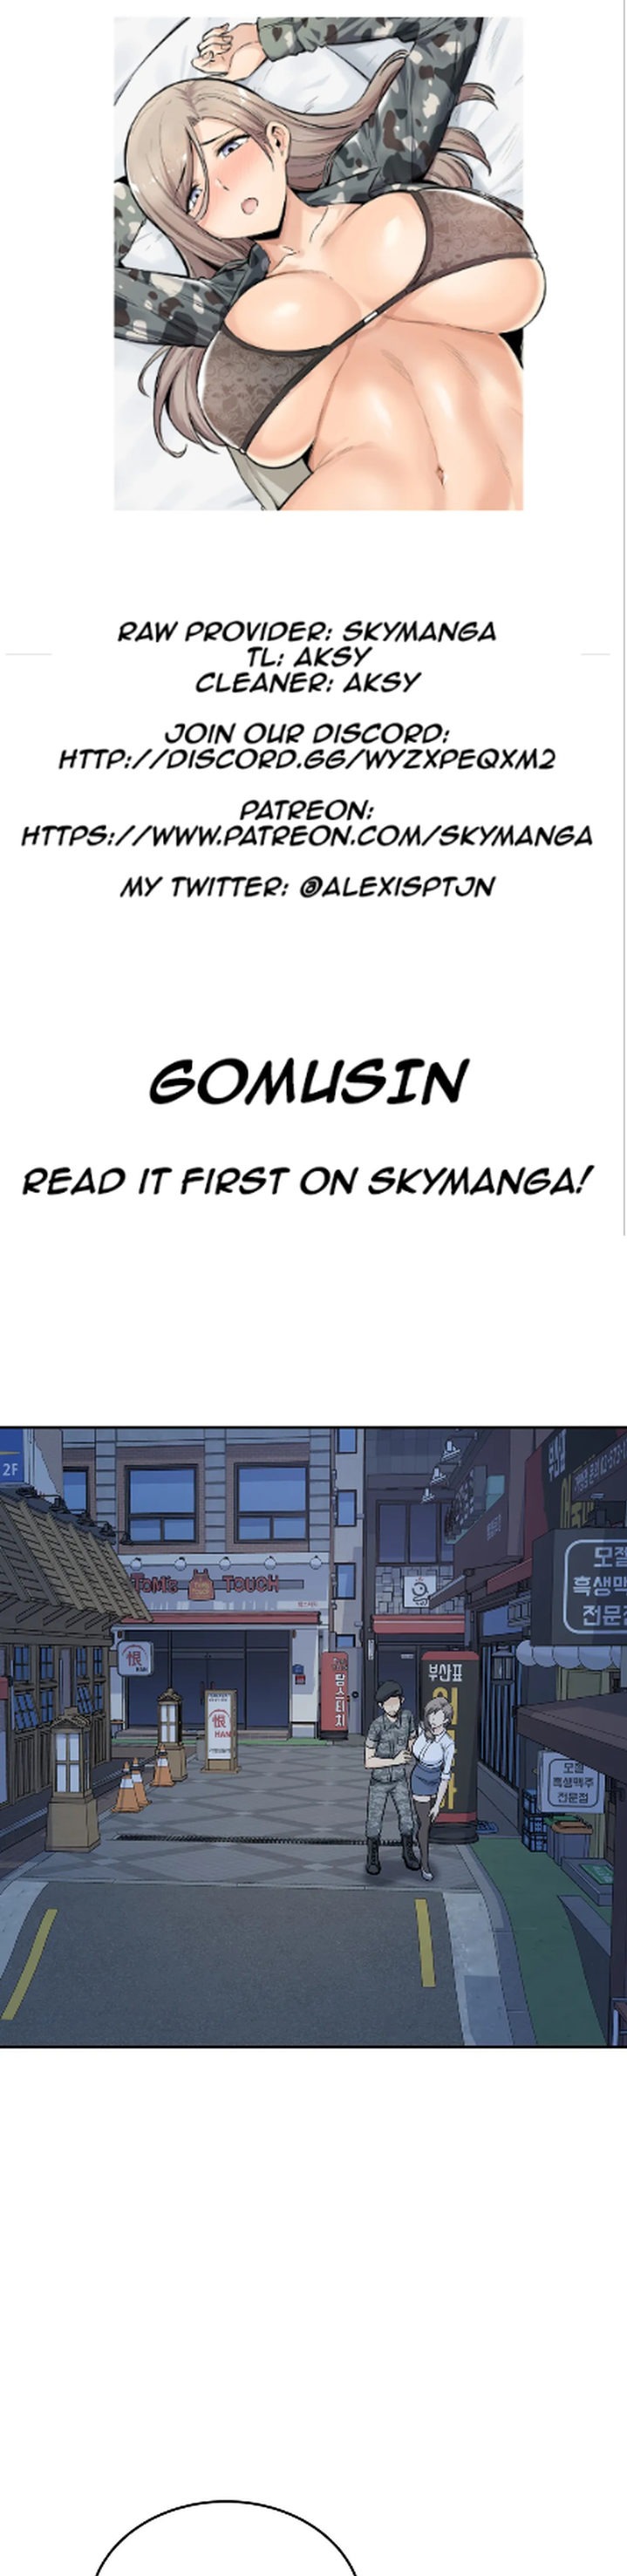 Gomusin - Chapter 6 Page 1